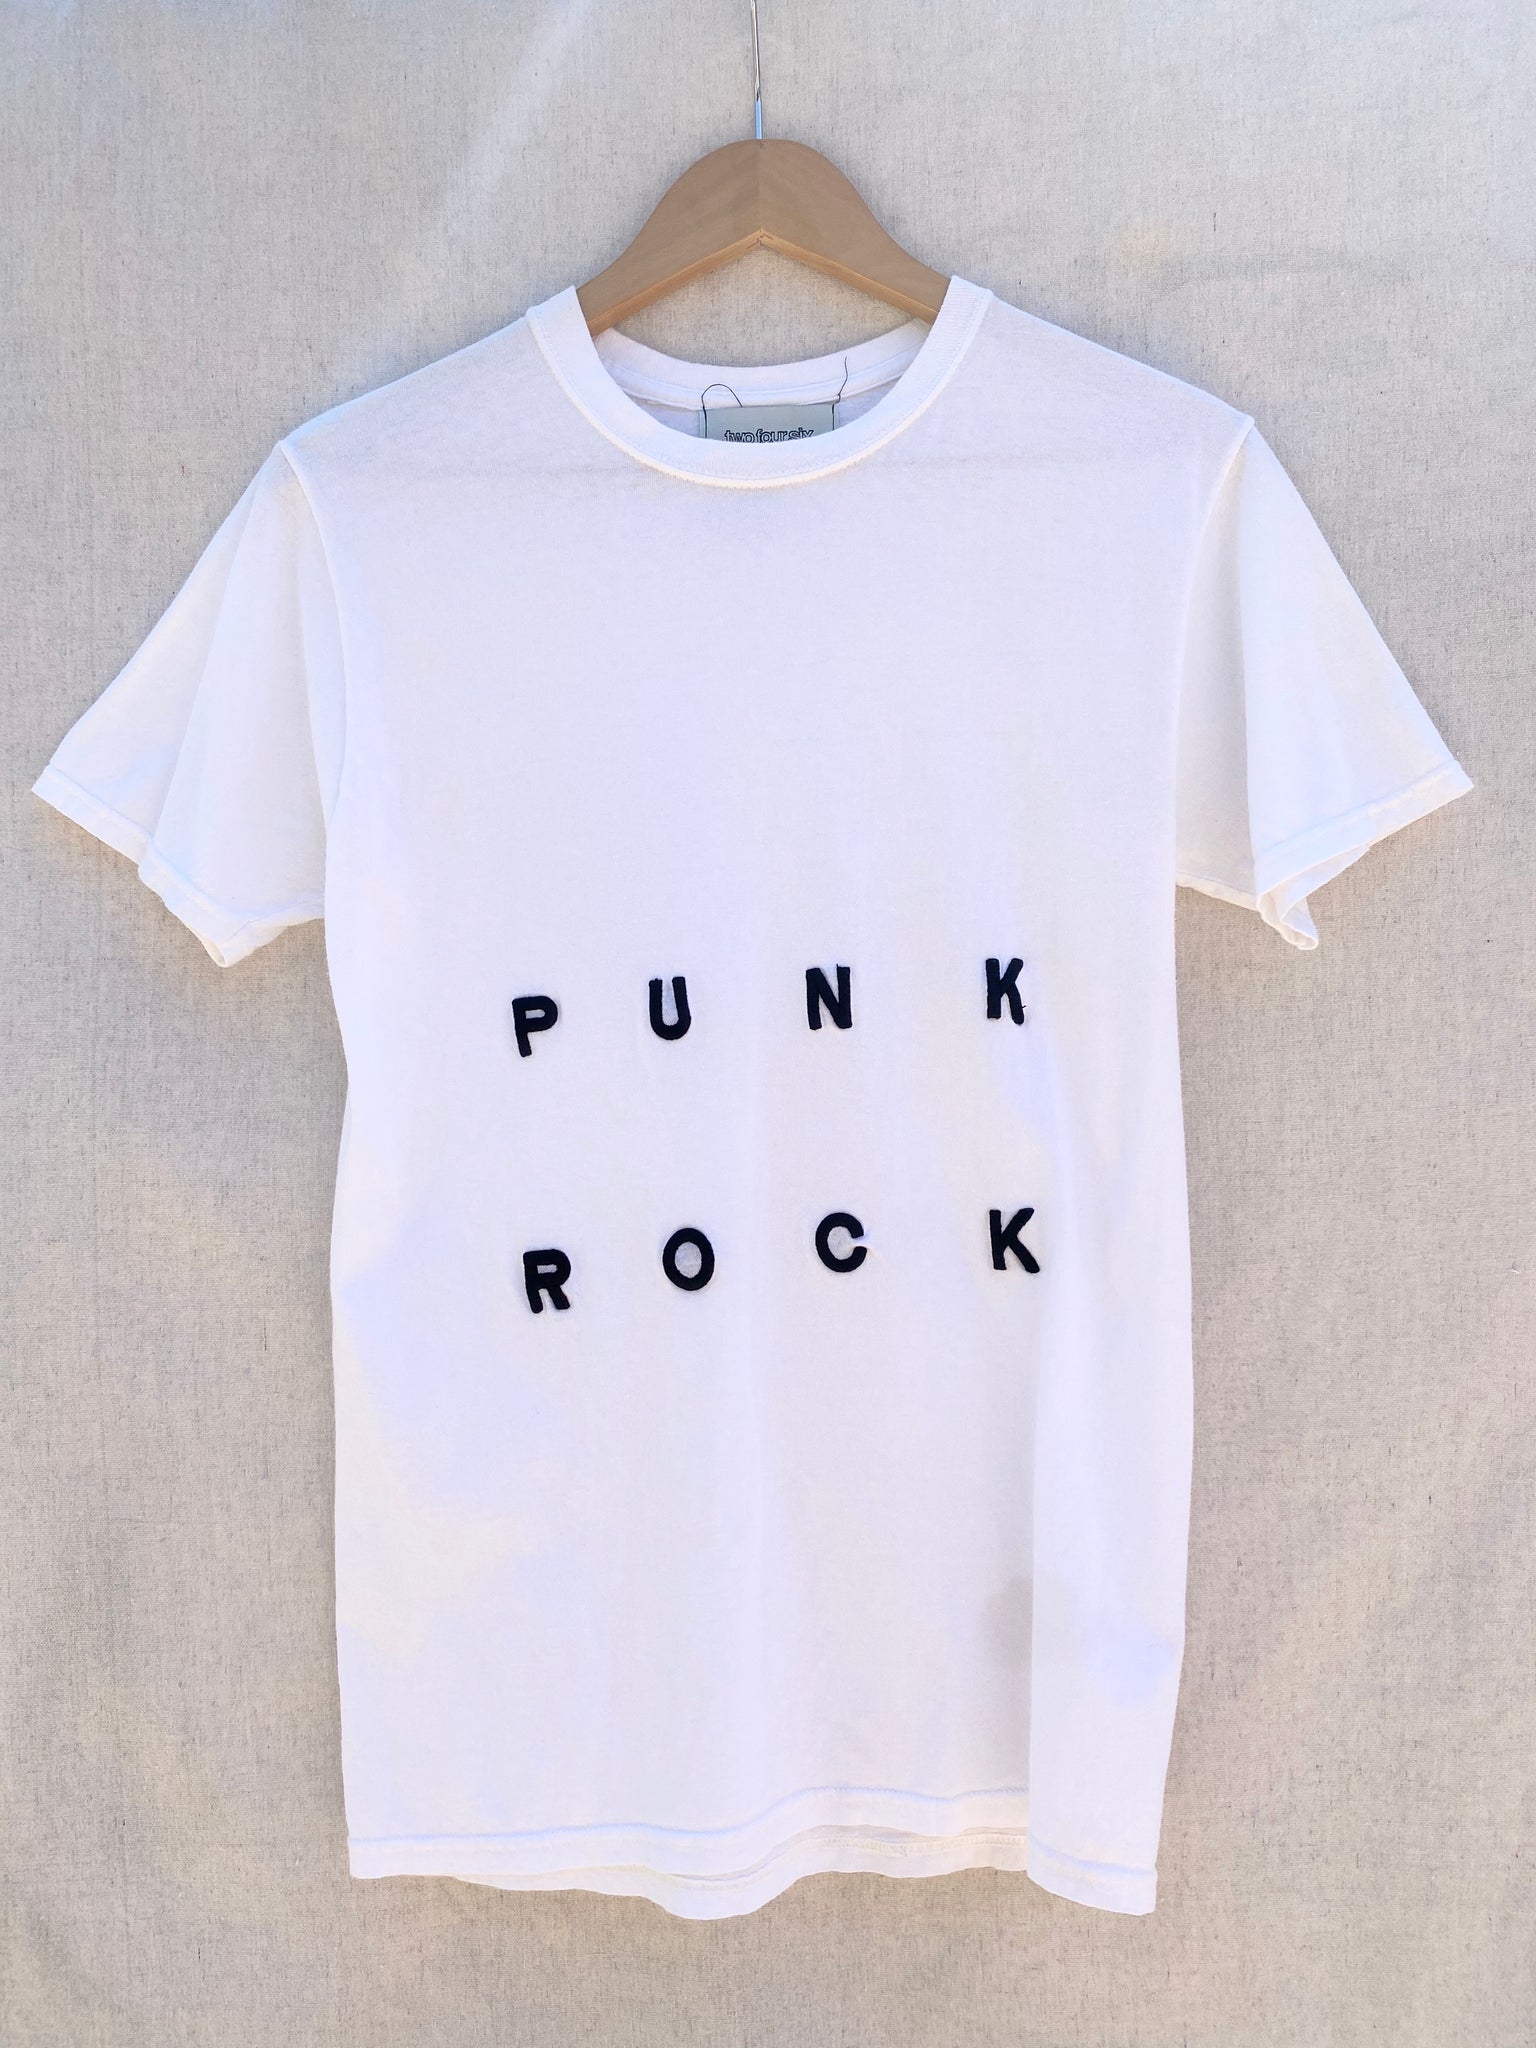 IMAGE OF WHITE T-SHIRT FRONT VIEW WITH PUNK ROCK EMBROIDERY IN BLACK.